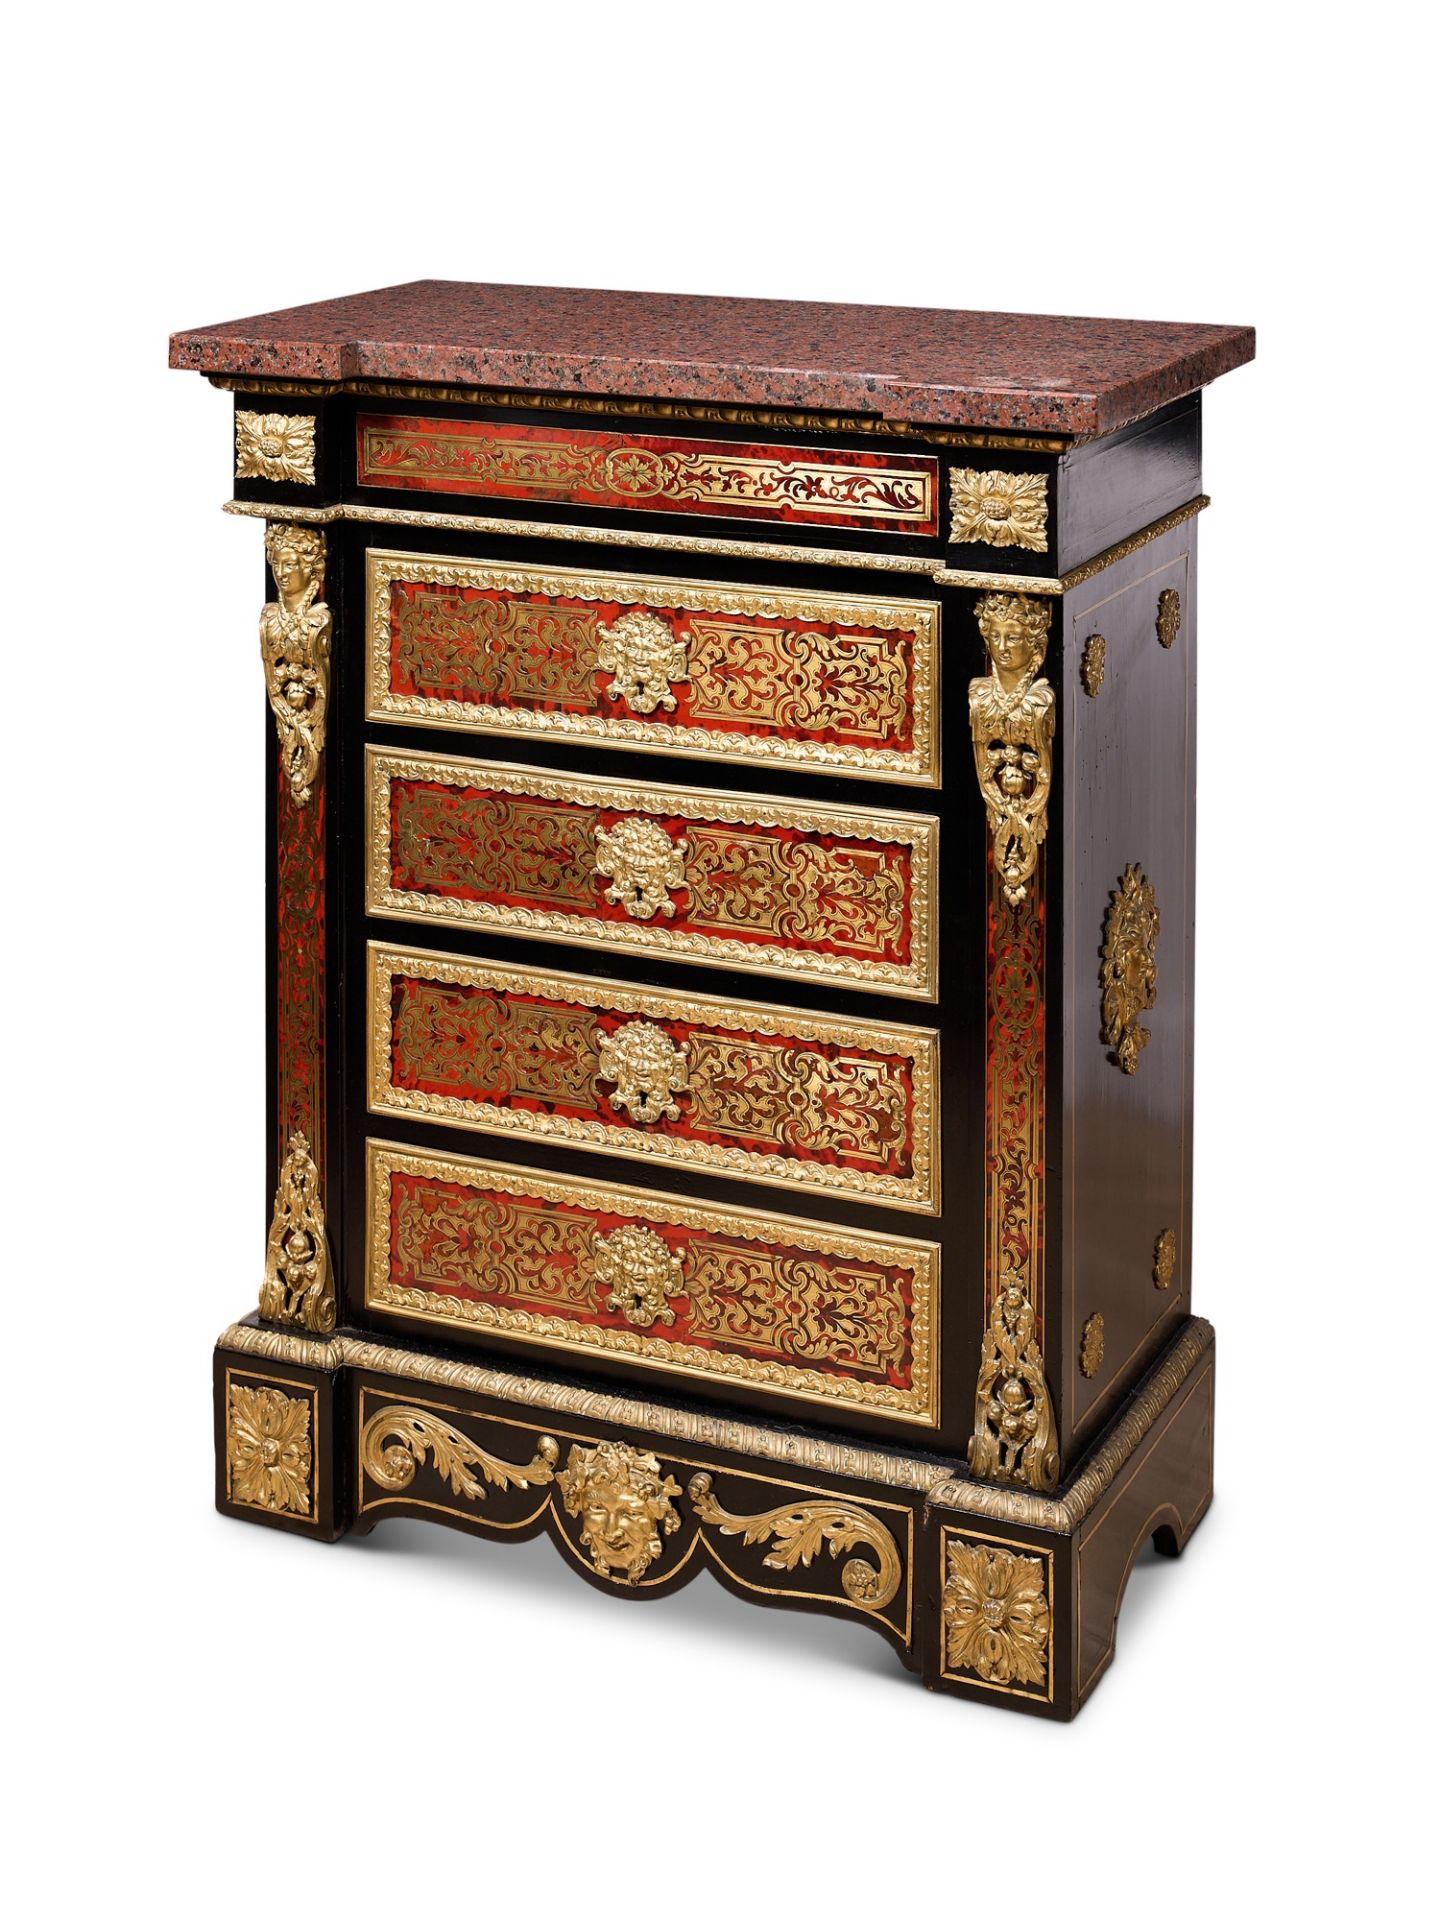 A FINE LATE 19TH CENTURY BOULLE STYLE TORTOISESHELL AND CUT BRASS CHEST OF DRAWERS